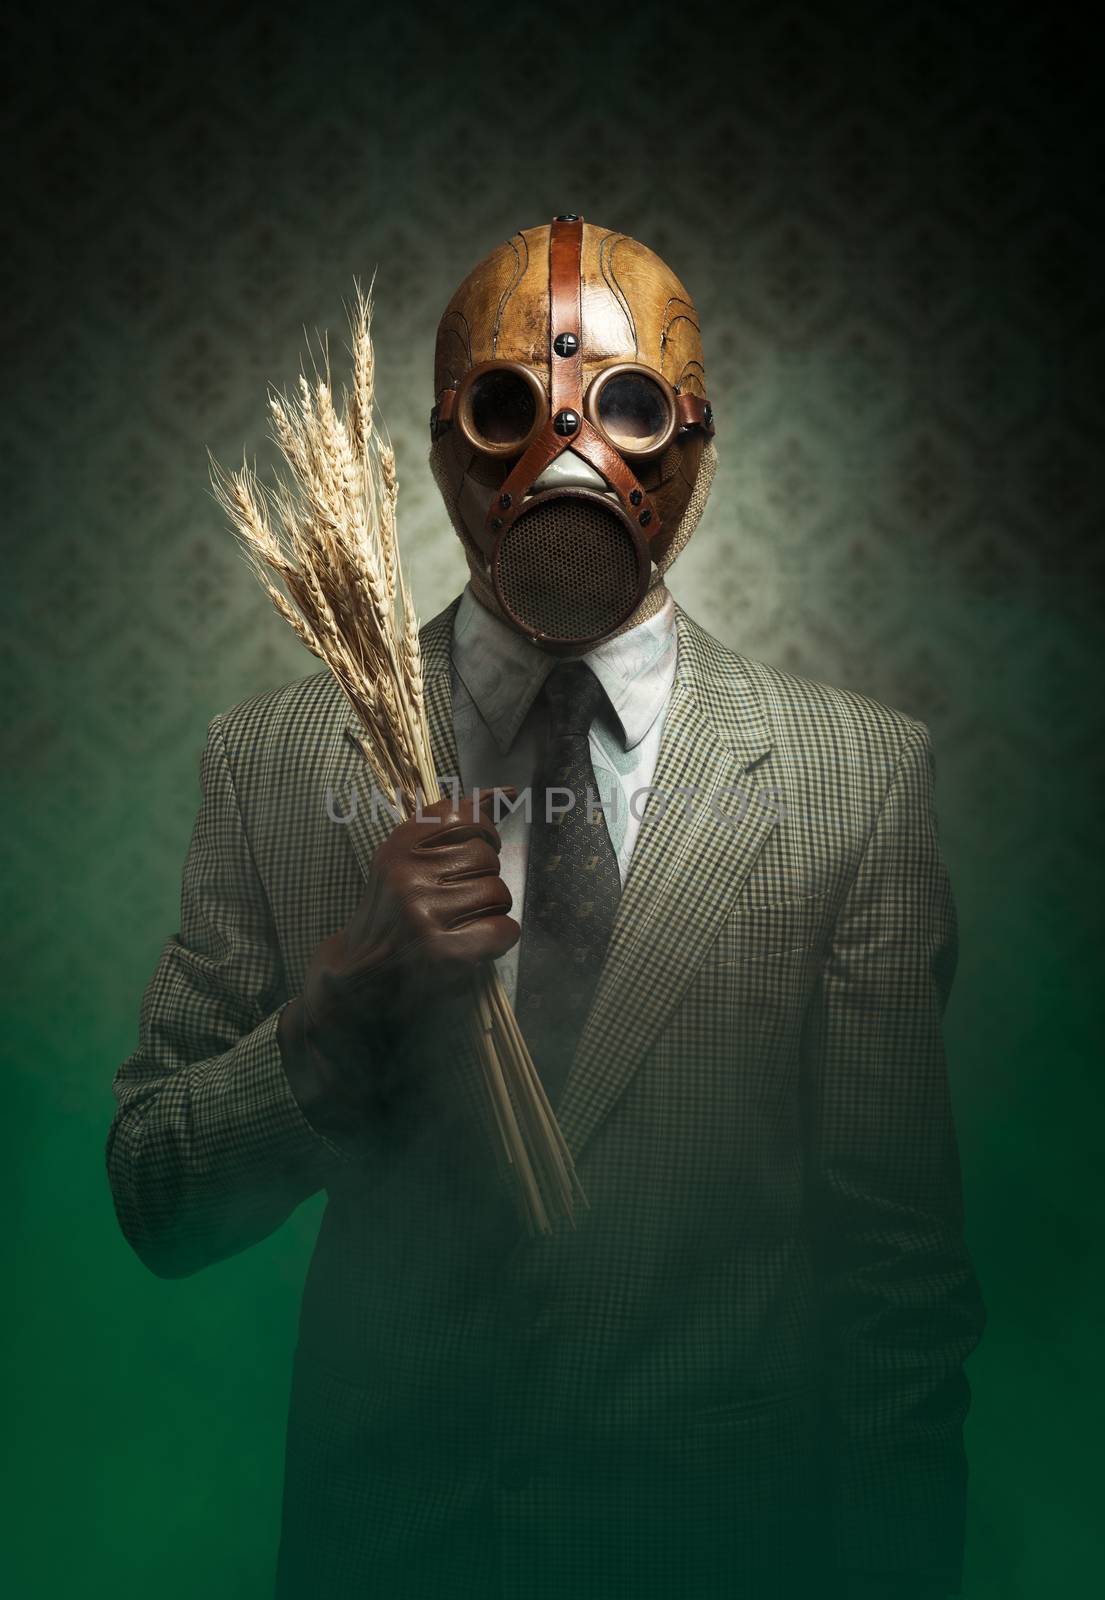 Man wearing a gas mask and holding ears of wheat with toxic smoke on background.